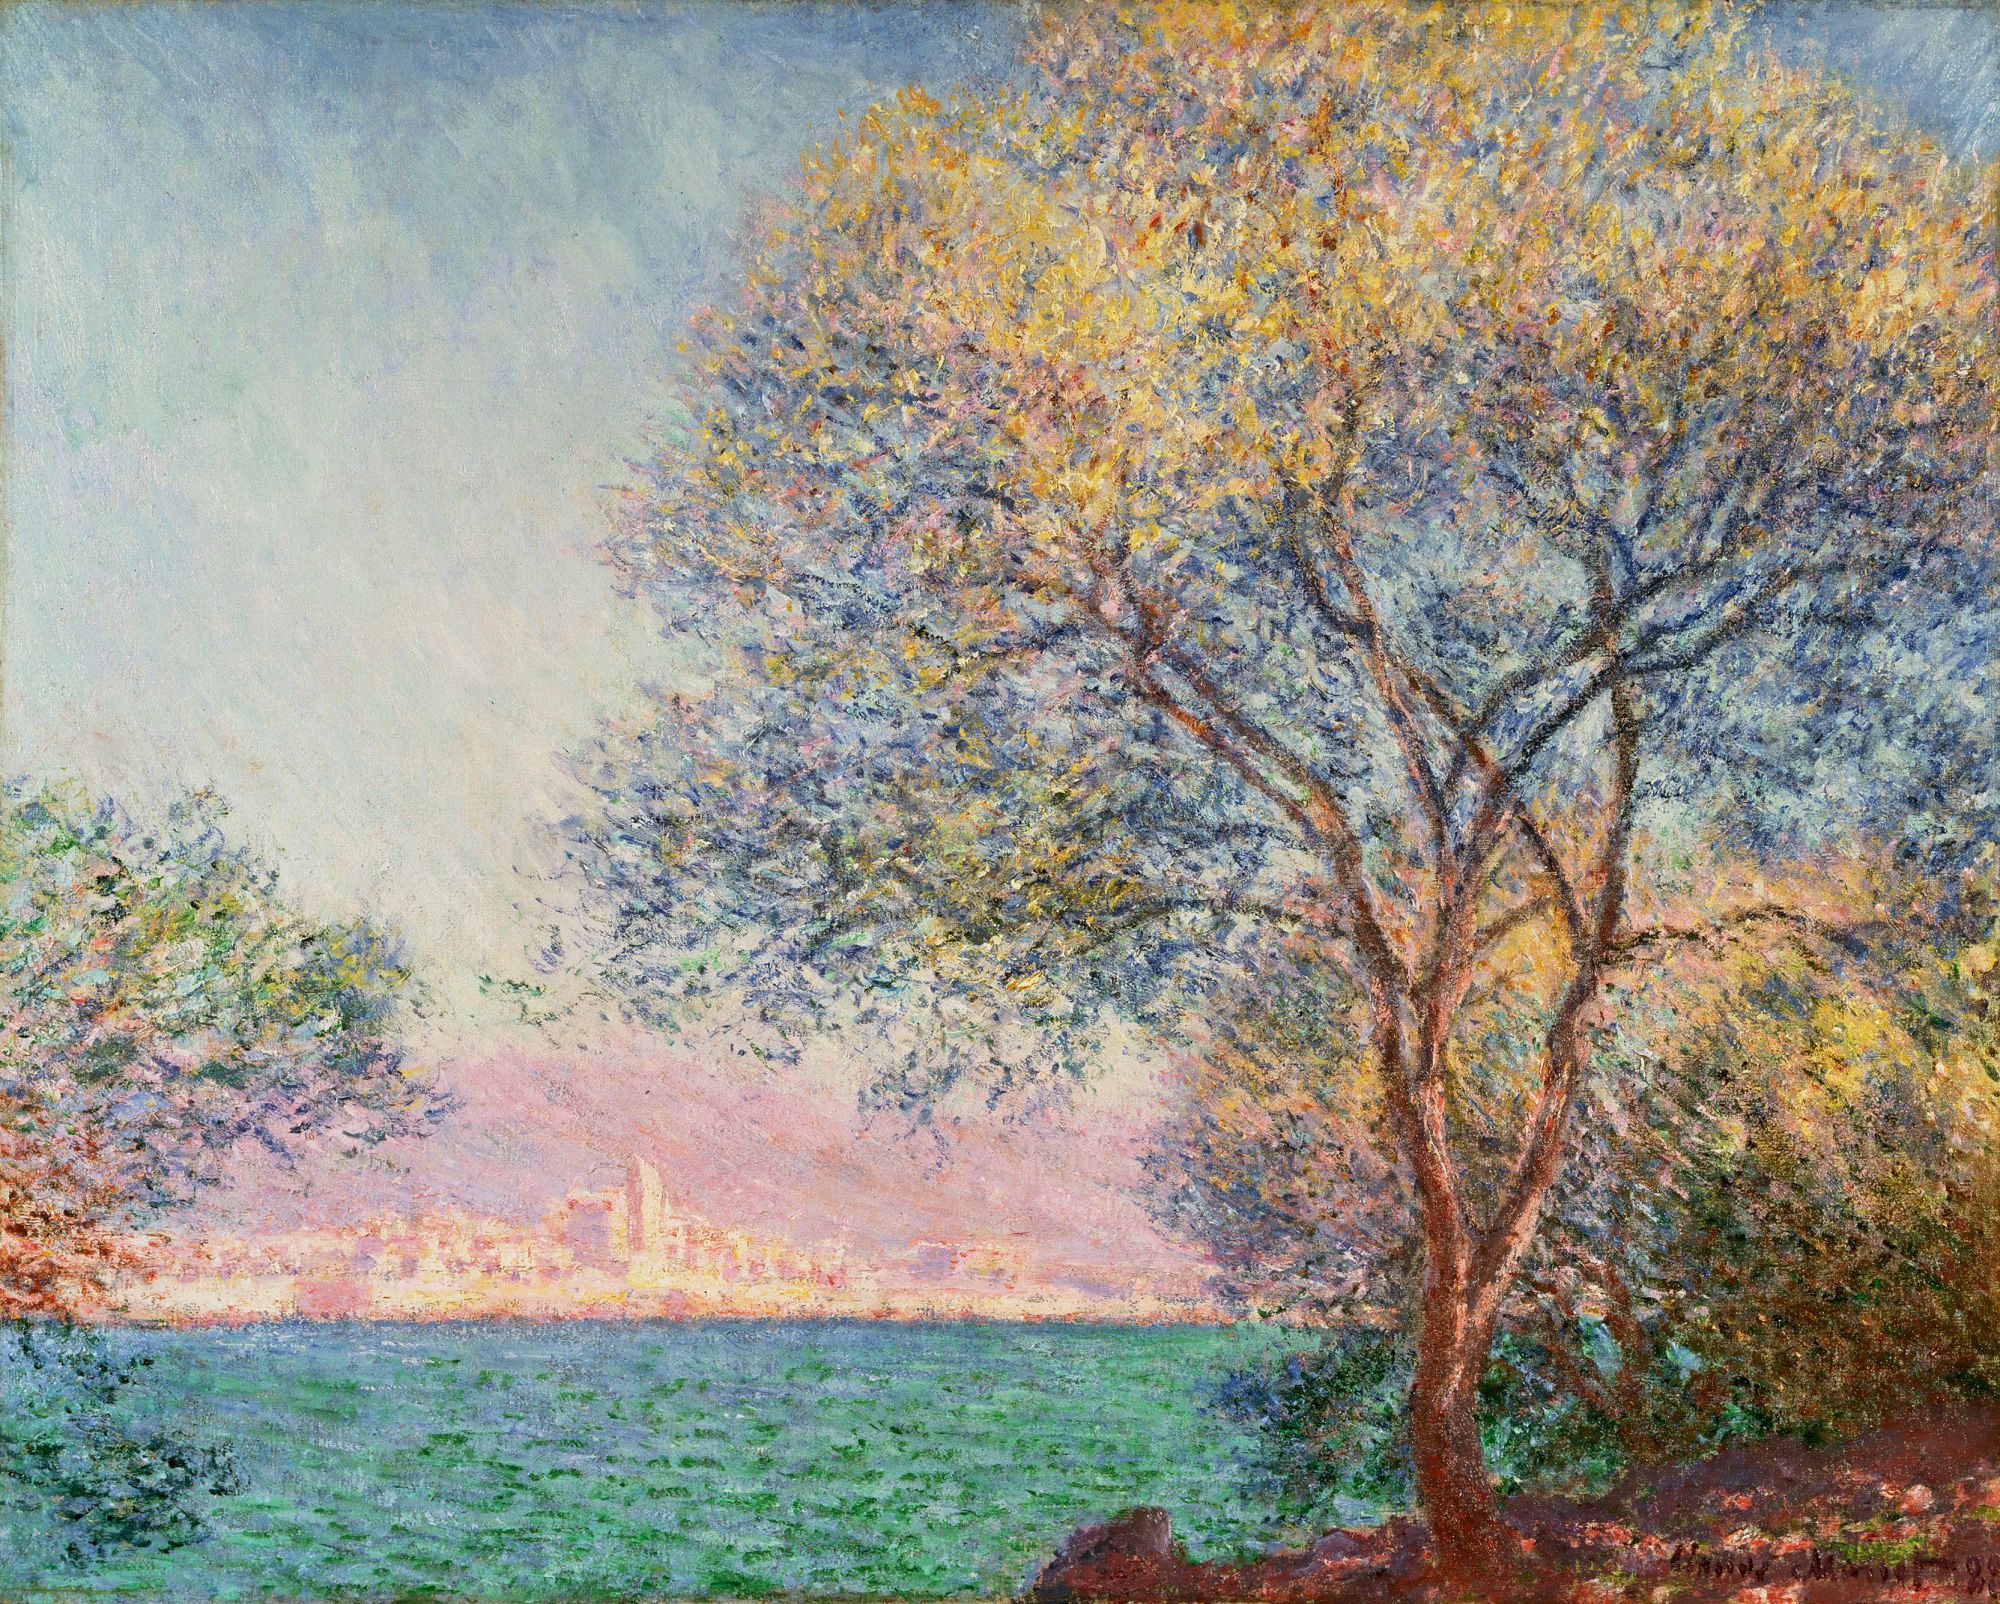 65+ Monet Wallpapers: HD, 4K, 5K for PC and Mobile | Download free images  for iPhone, Android